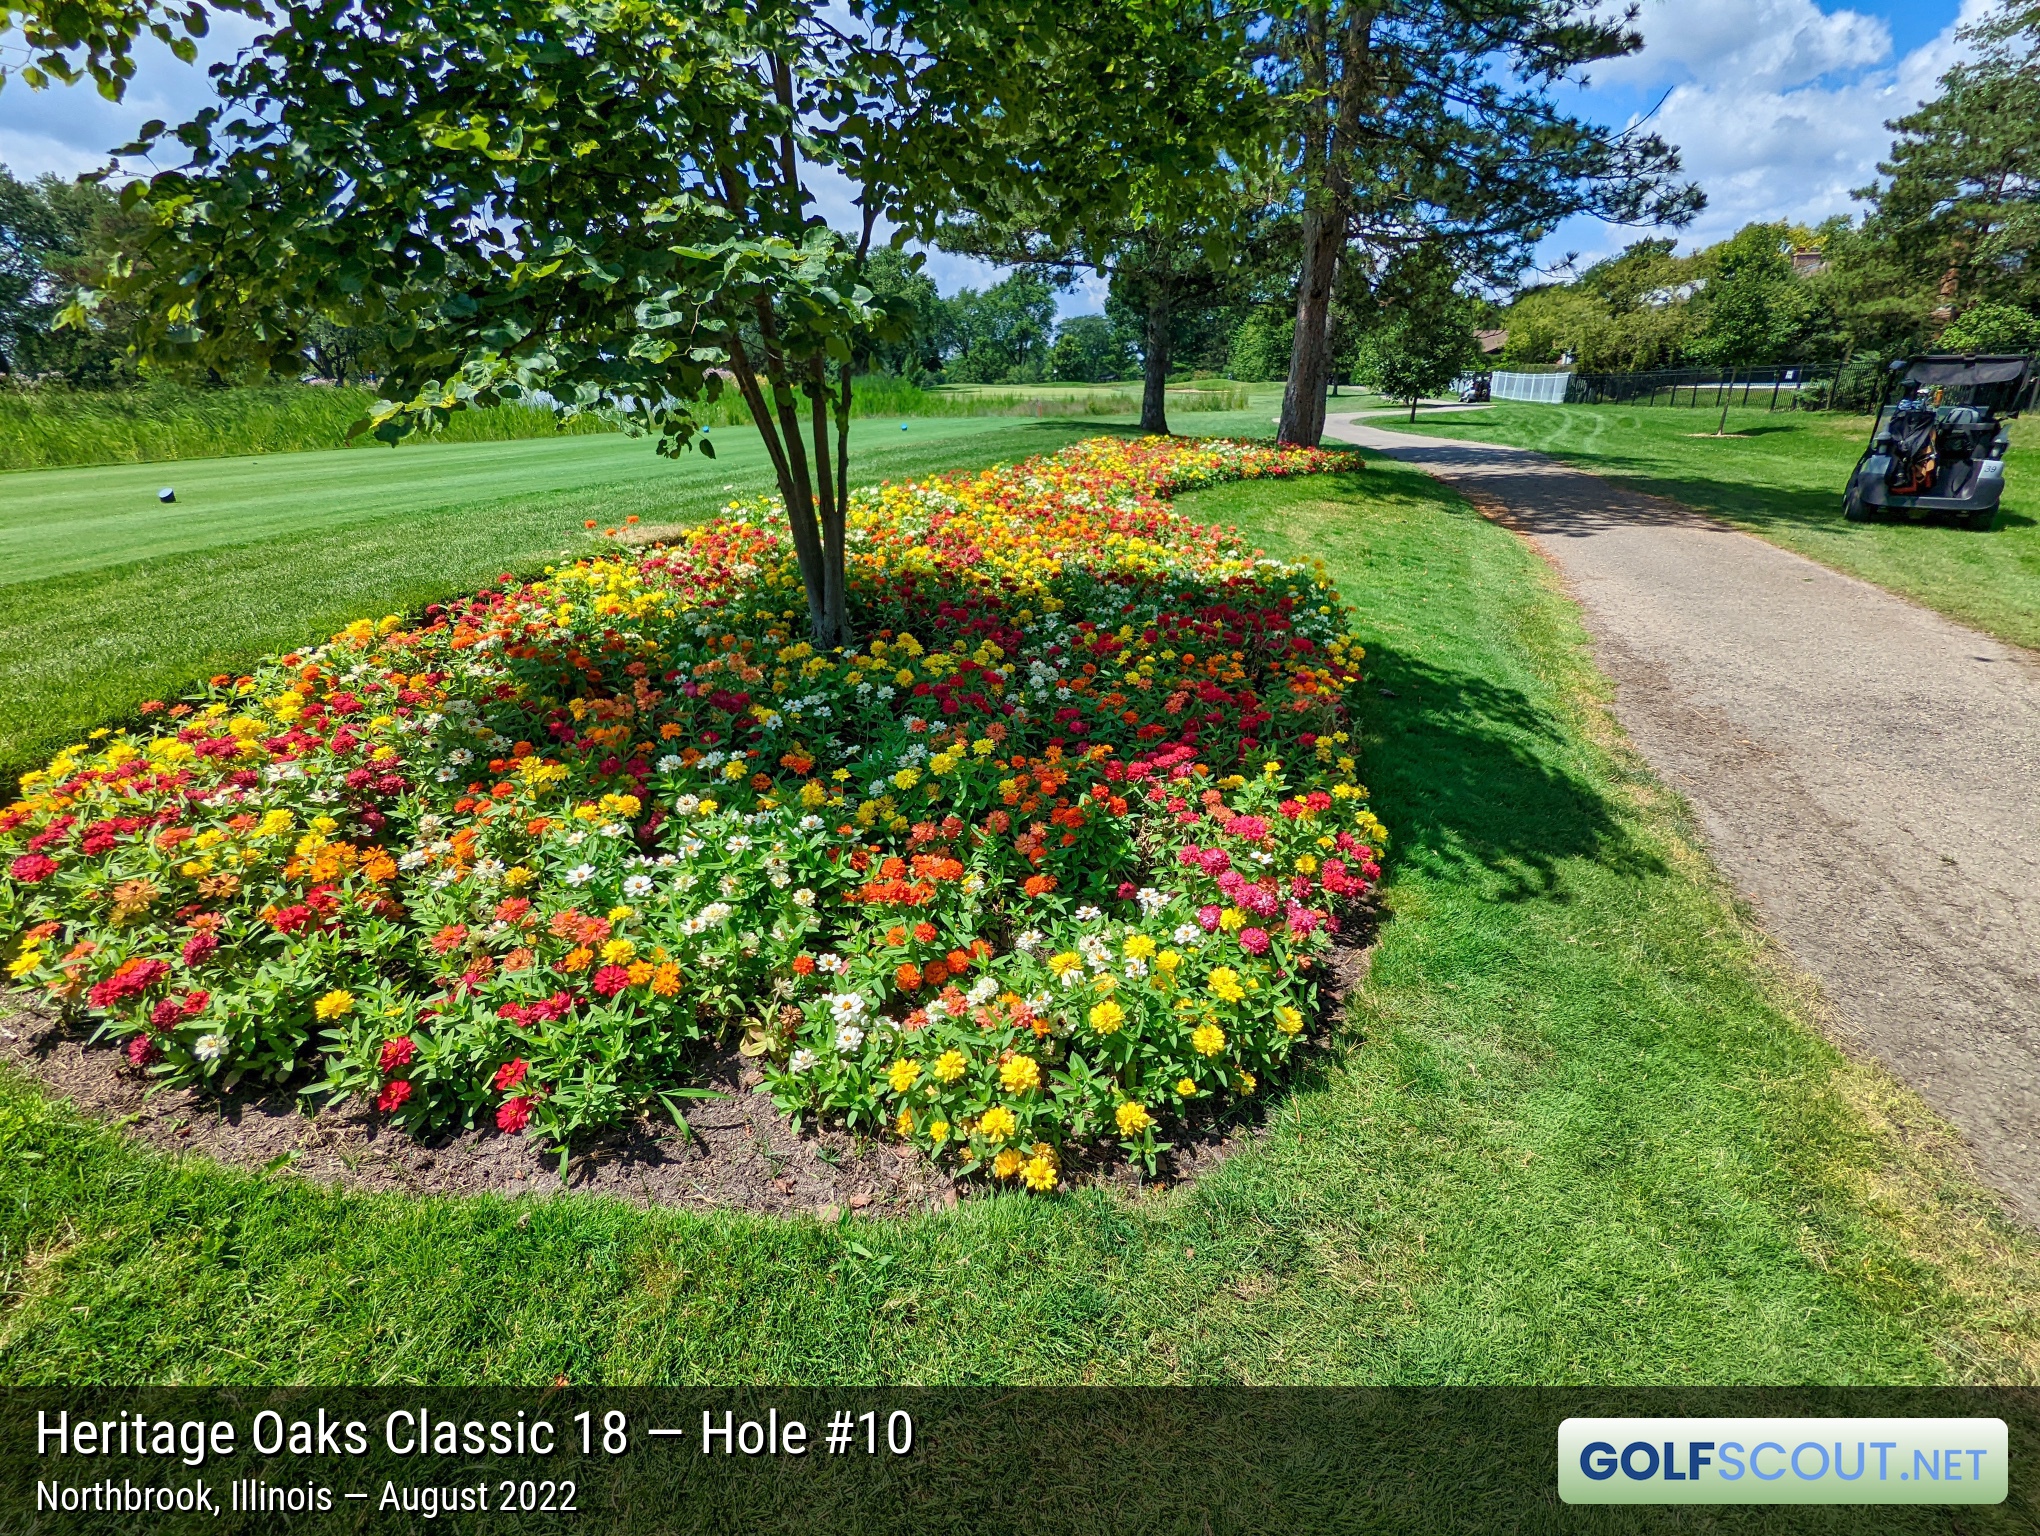 Photo of hole #10 at Heritage Oaks Golf Club - Classic 18 in Northbrook, Illinois. 